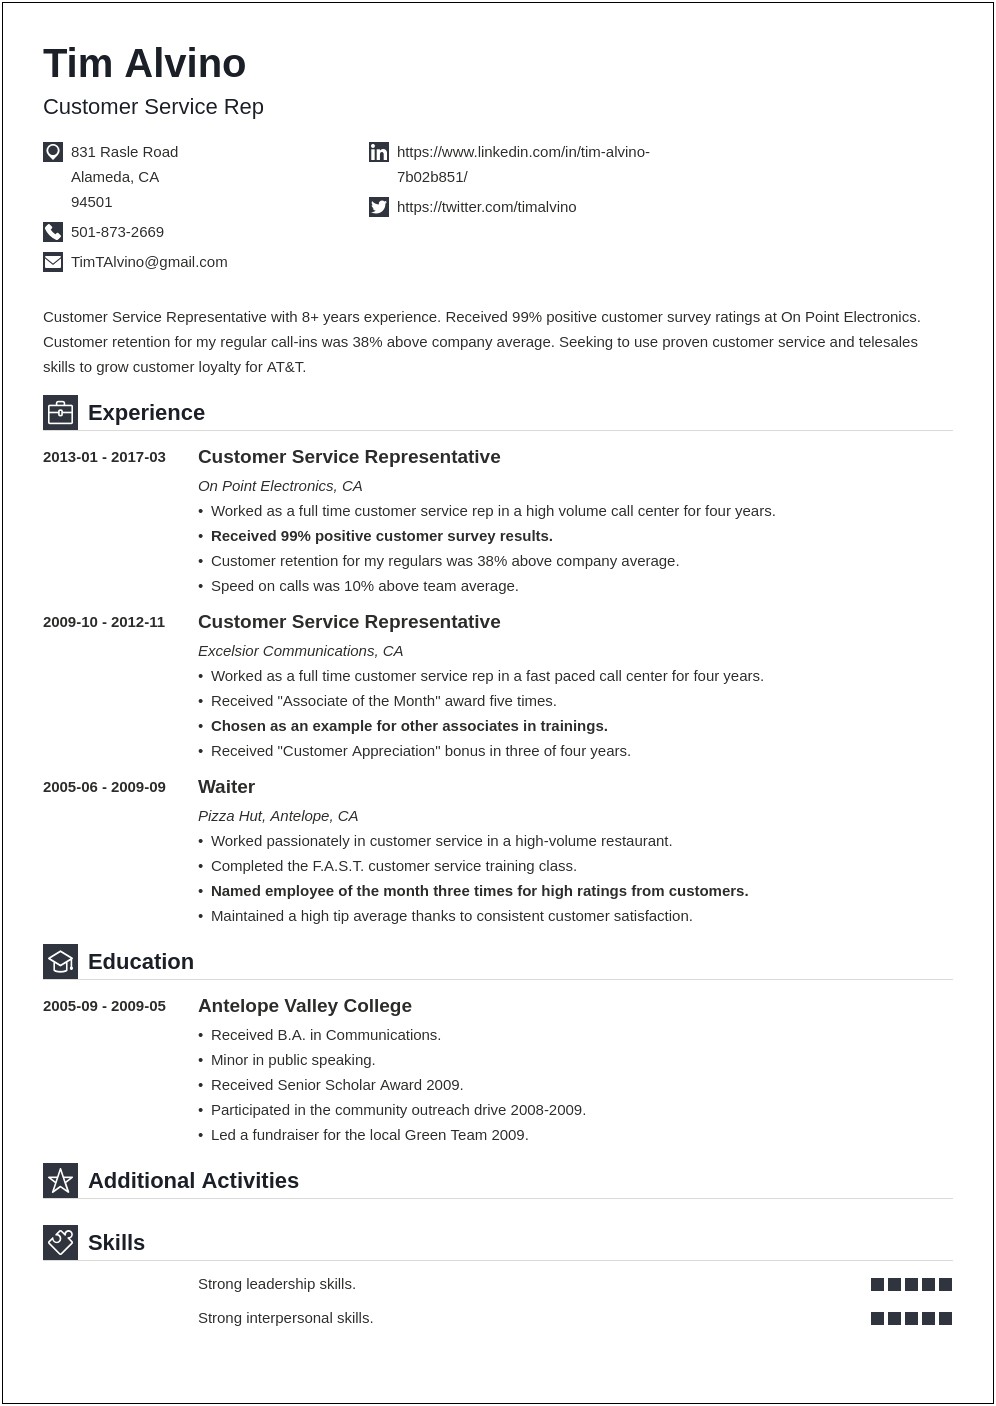 Tailoring A Resume For Service Work